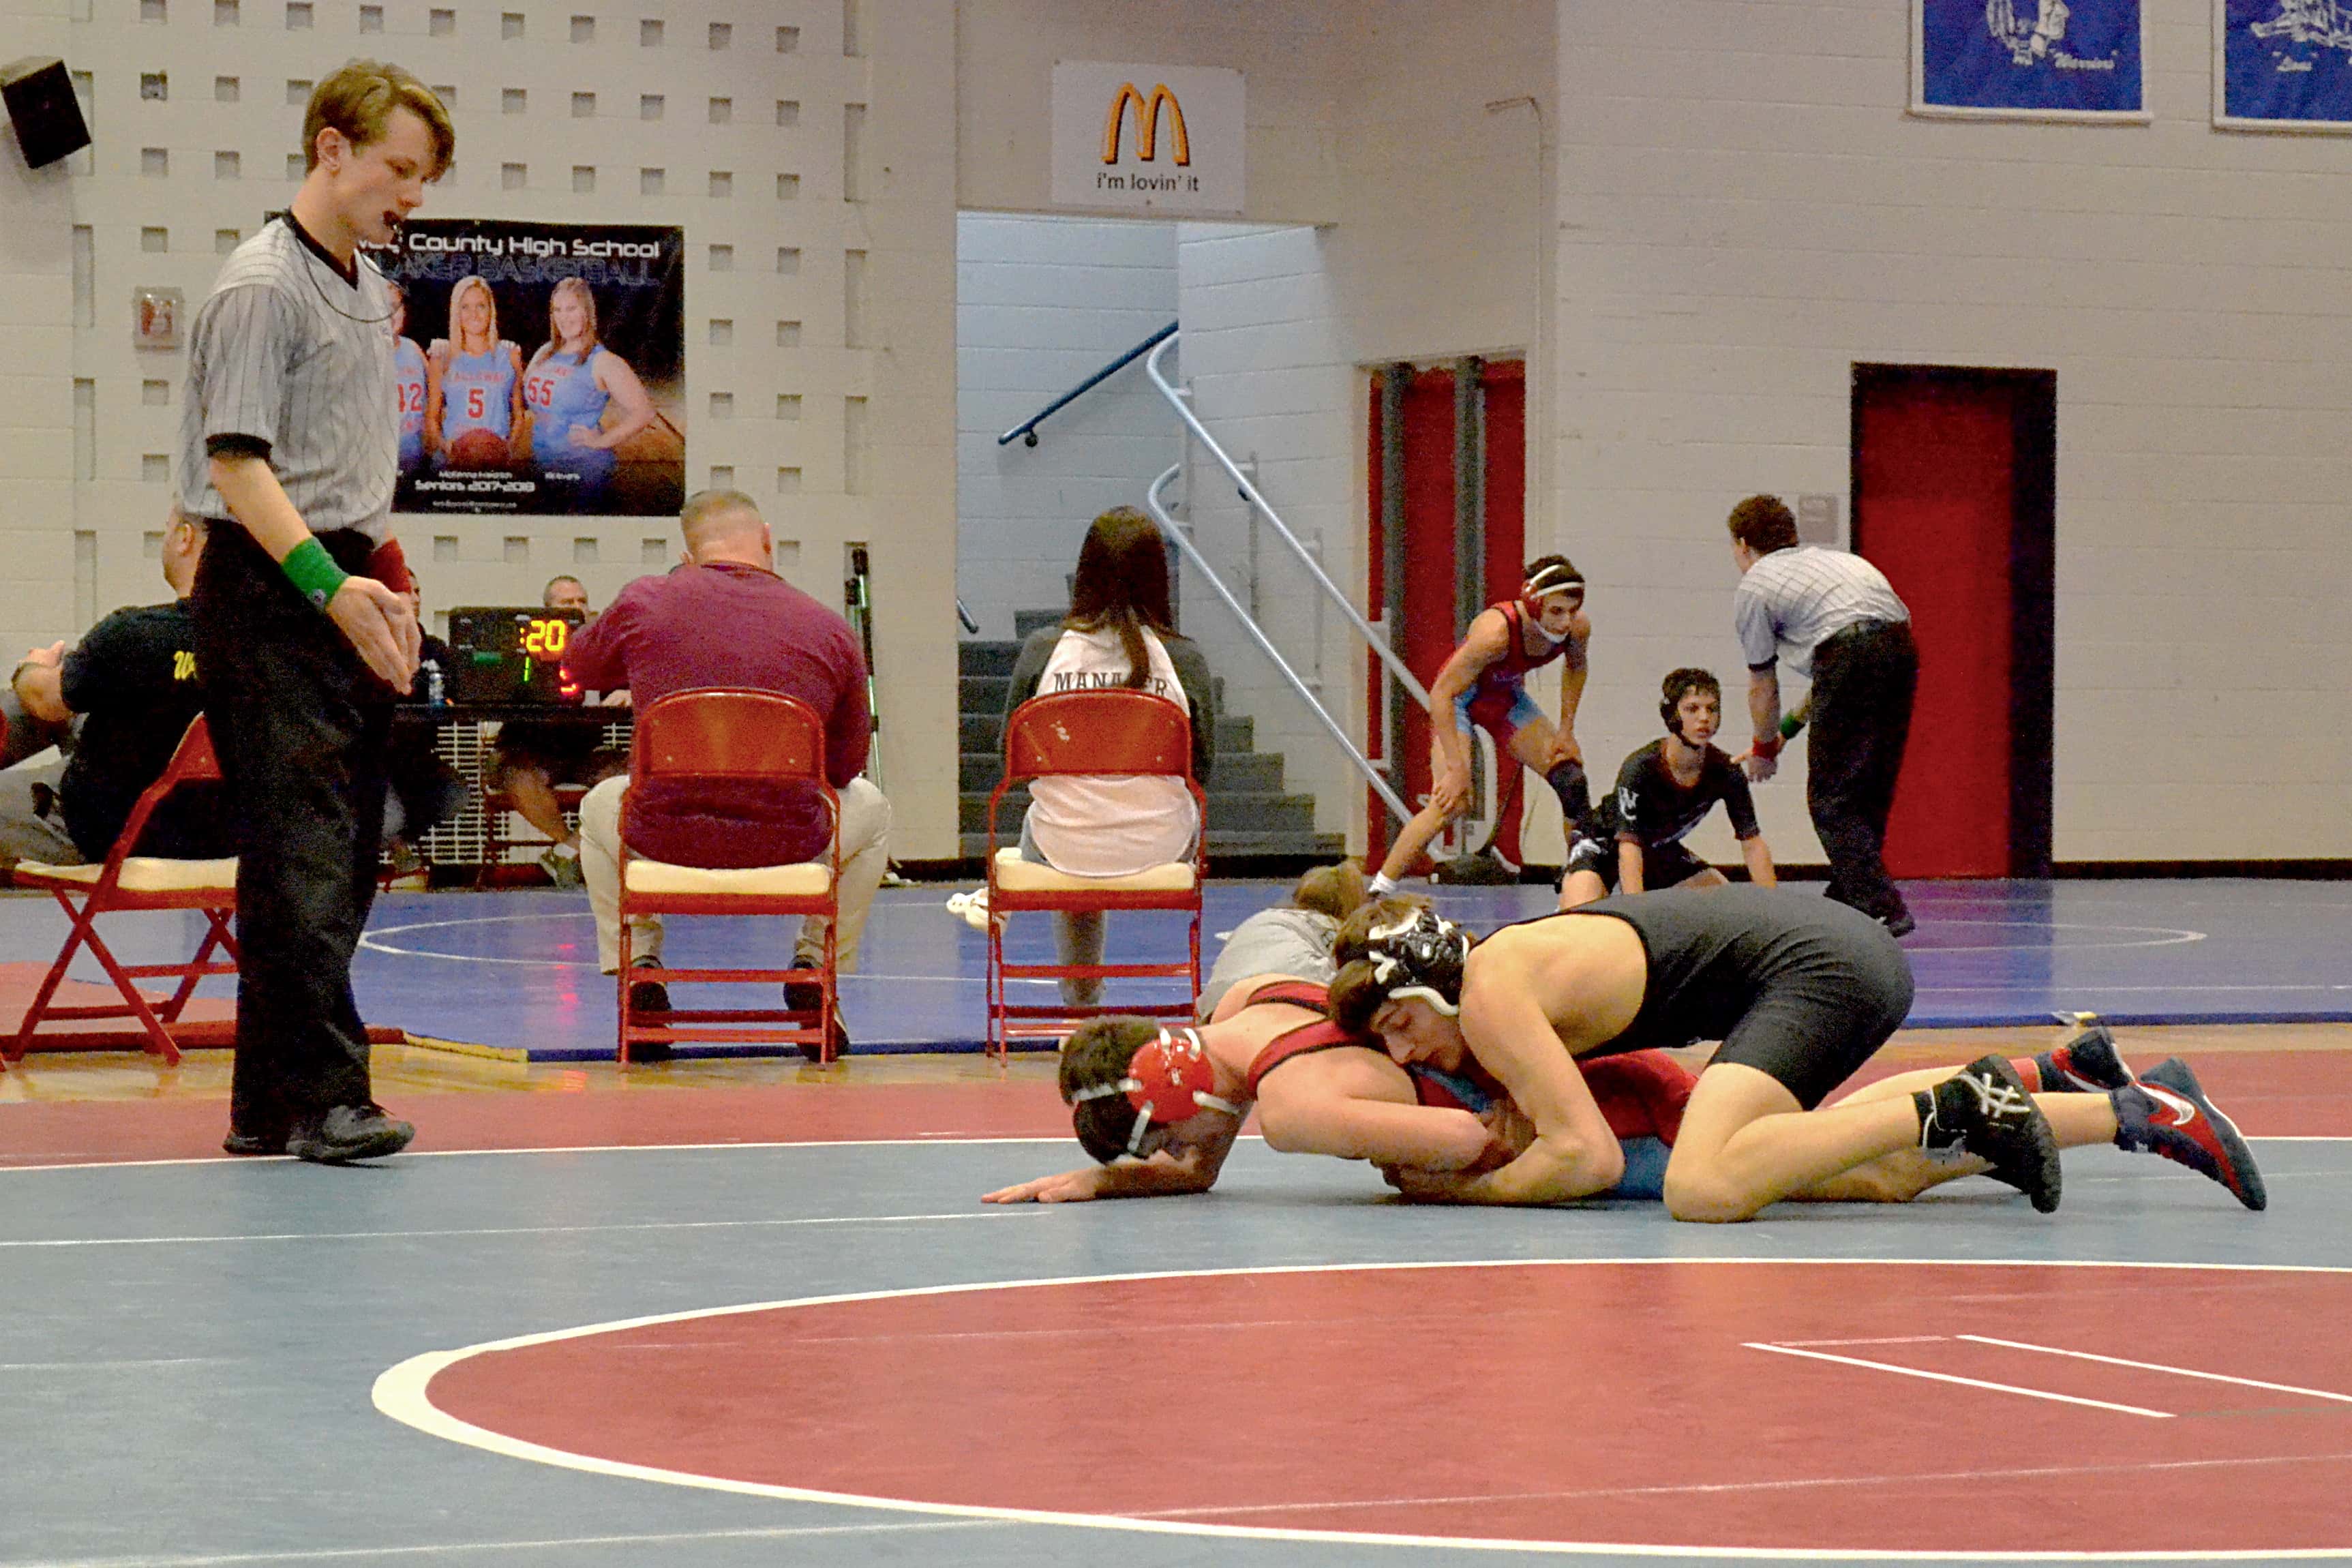 Futrell defeated Calloway County’s Jeffrey Littlebrant to advance to the finals.: Futrell defeated Calloway County's Jeffrey Littlebrant to advance to the finals.